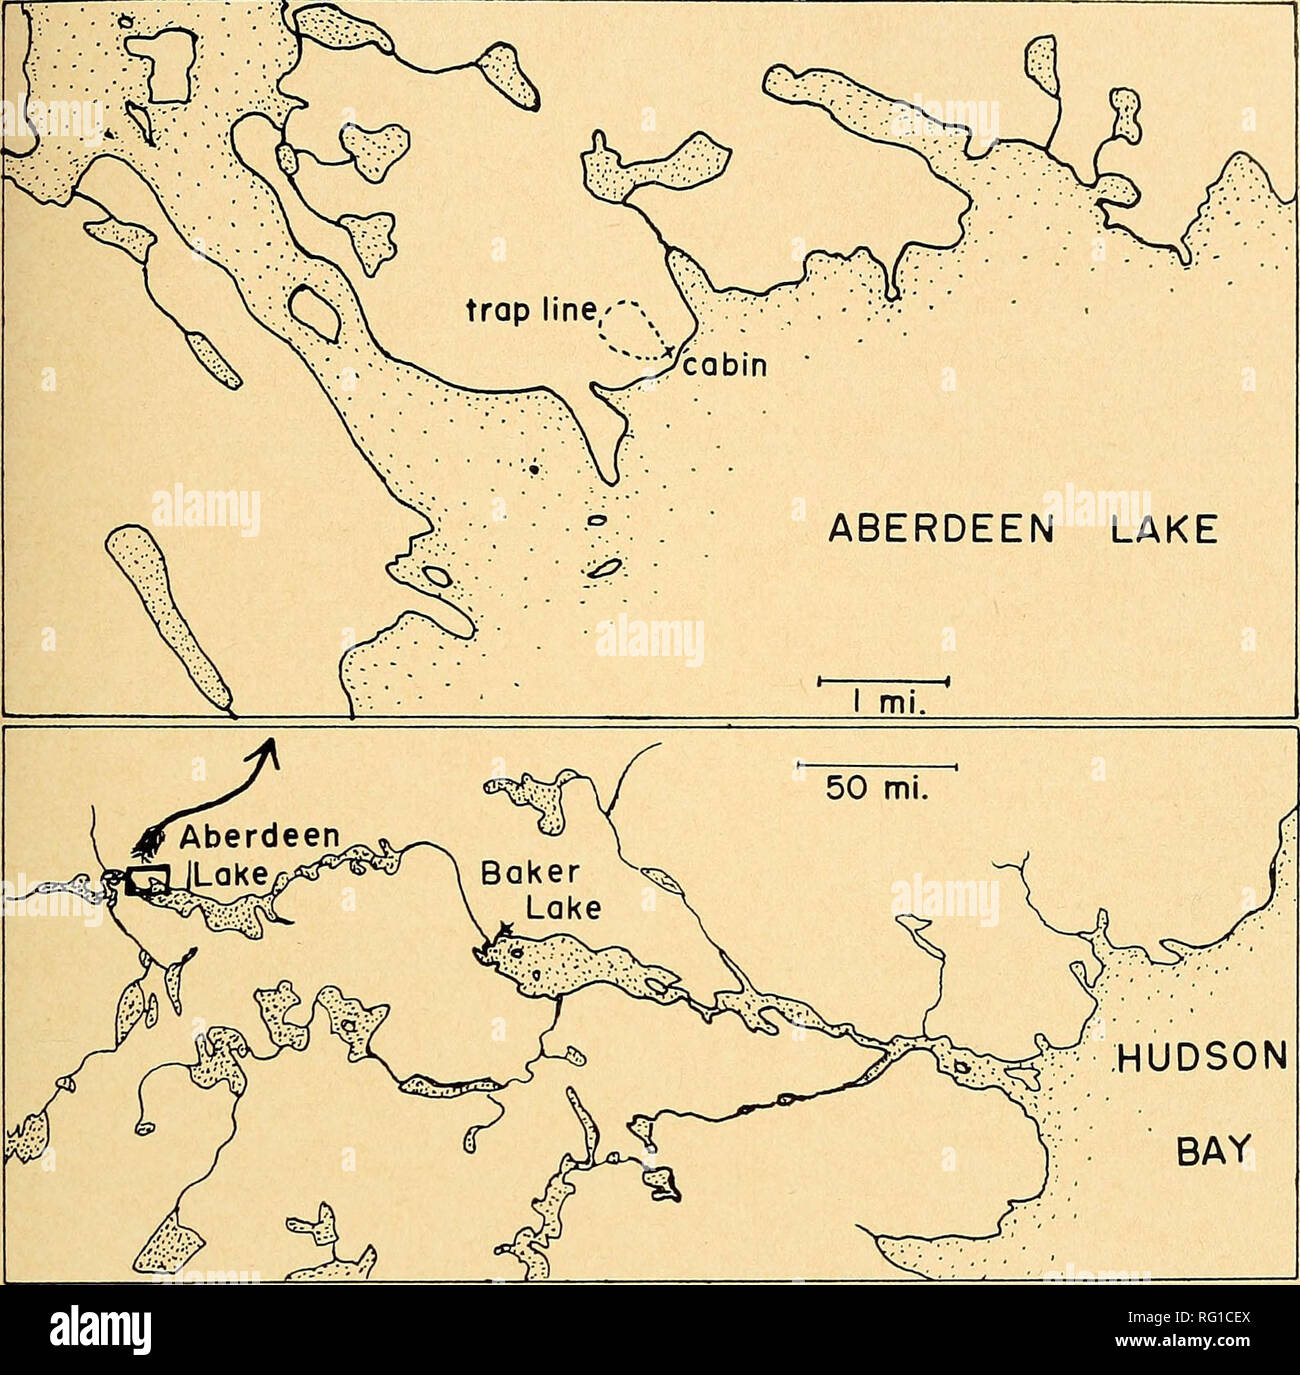 . The Canadian field-naturalist. 1966 Macpherson: Abundance of Lemmings 91. Figure 1. The location of the standard trap line at Aberdeen Lake (top) in the District of Keewatin, Northwest Territories (bottom). been described by Kelsall and Loughrey (Kelsall, 1960) and by Krebs (1964). In well-drained places, it is often very sparse, being limited to a few clumps of grass and cushion plants. Elsewhere, the ridges may be densely clothed in black, crinkly lichen (Alectoria) which itself may cover a continuous layer of sphagnum moss, broken here and there by clumps of grass, or by mud-boils sup- po Stock Photo